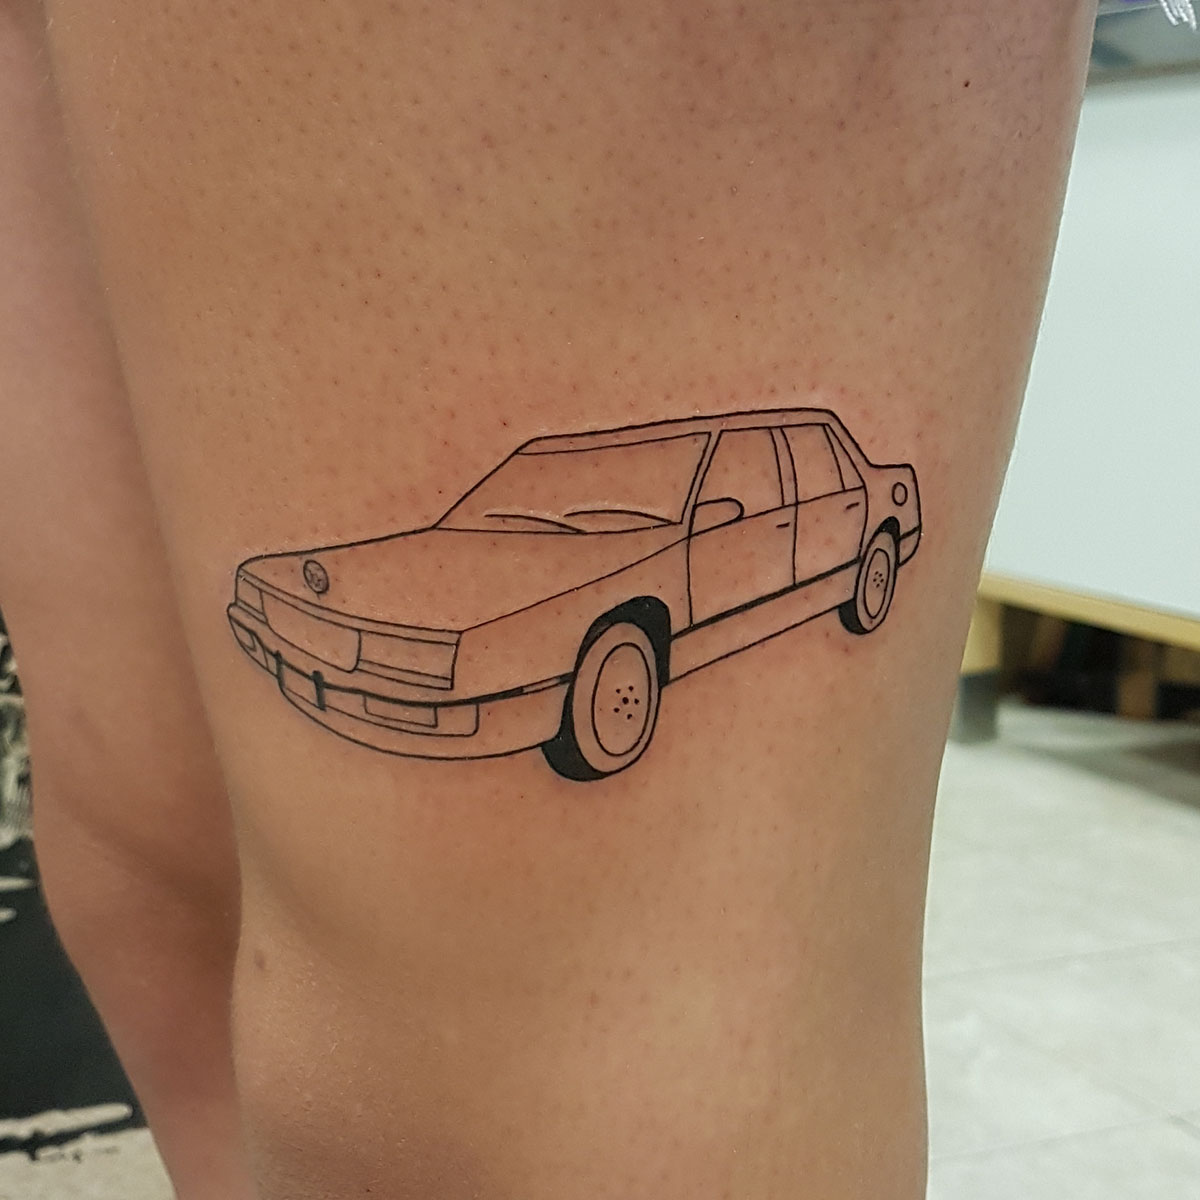 Tooradin Tattoo - Tammy's burnout car by Jay | Facebook